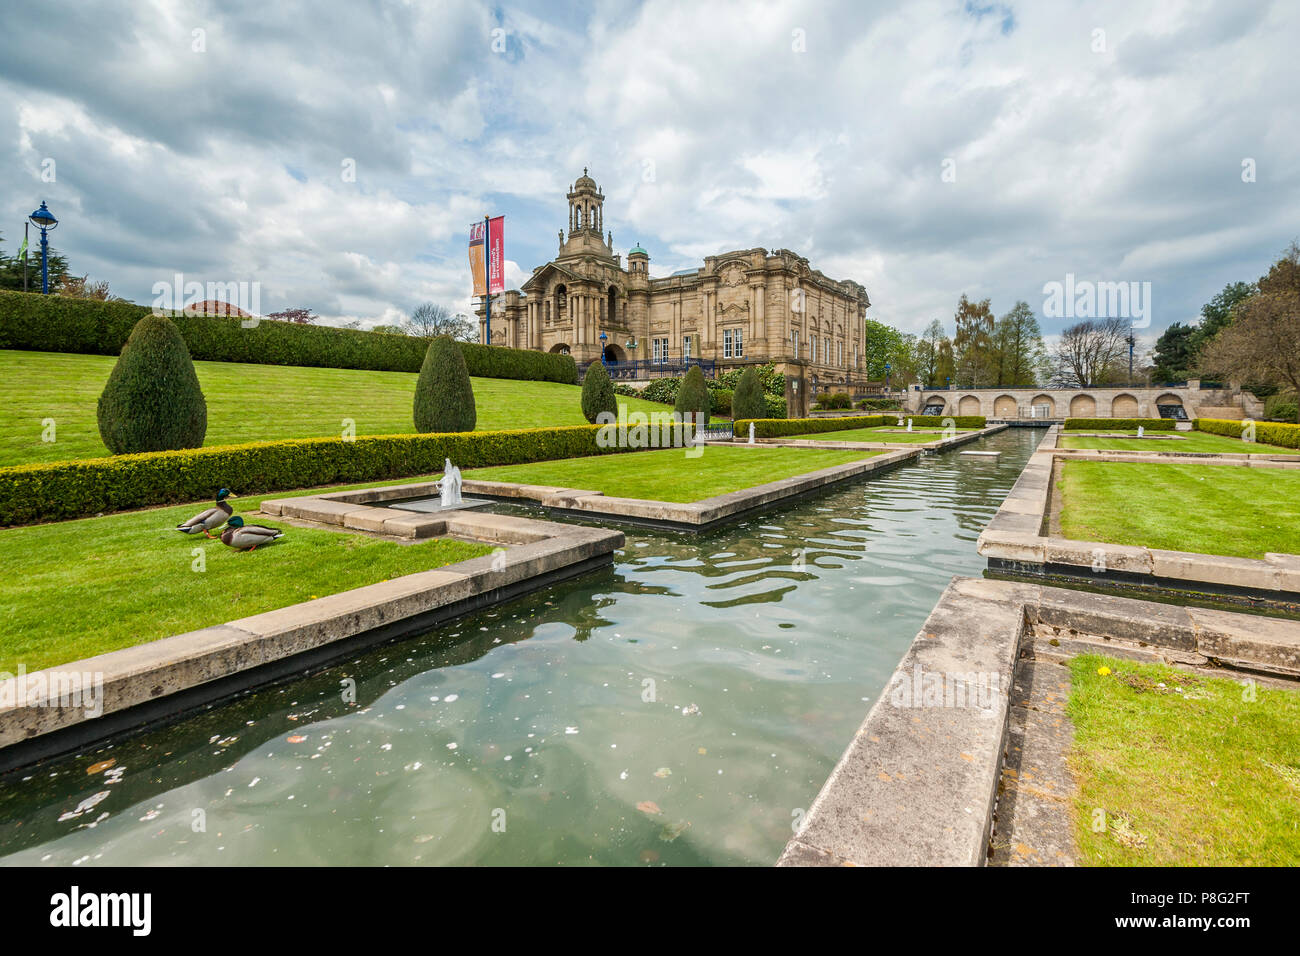 cartwright hall situated in lister park along manningham lane in the heaton area of bradford Stock Photo